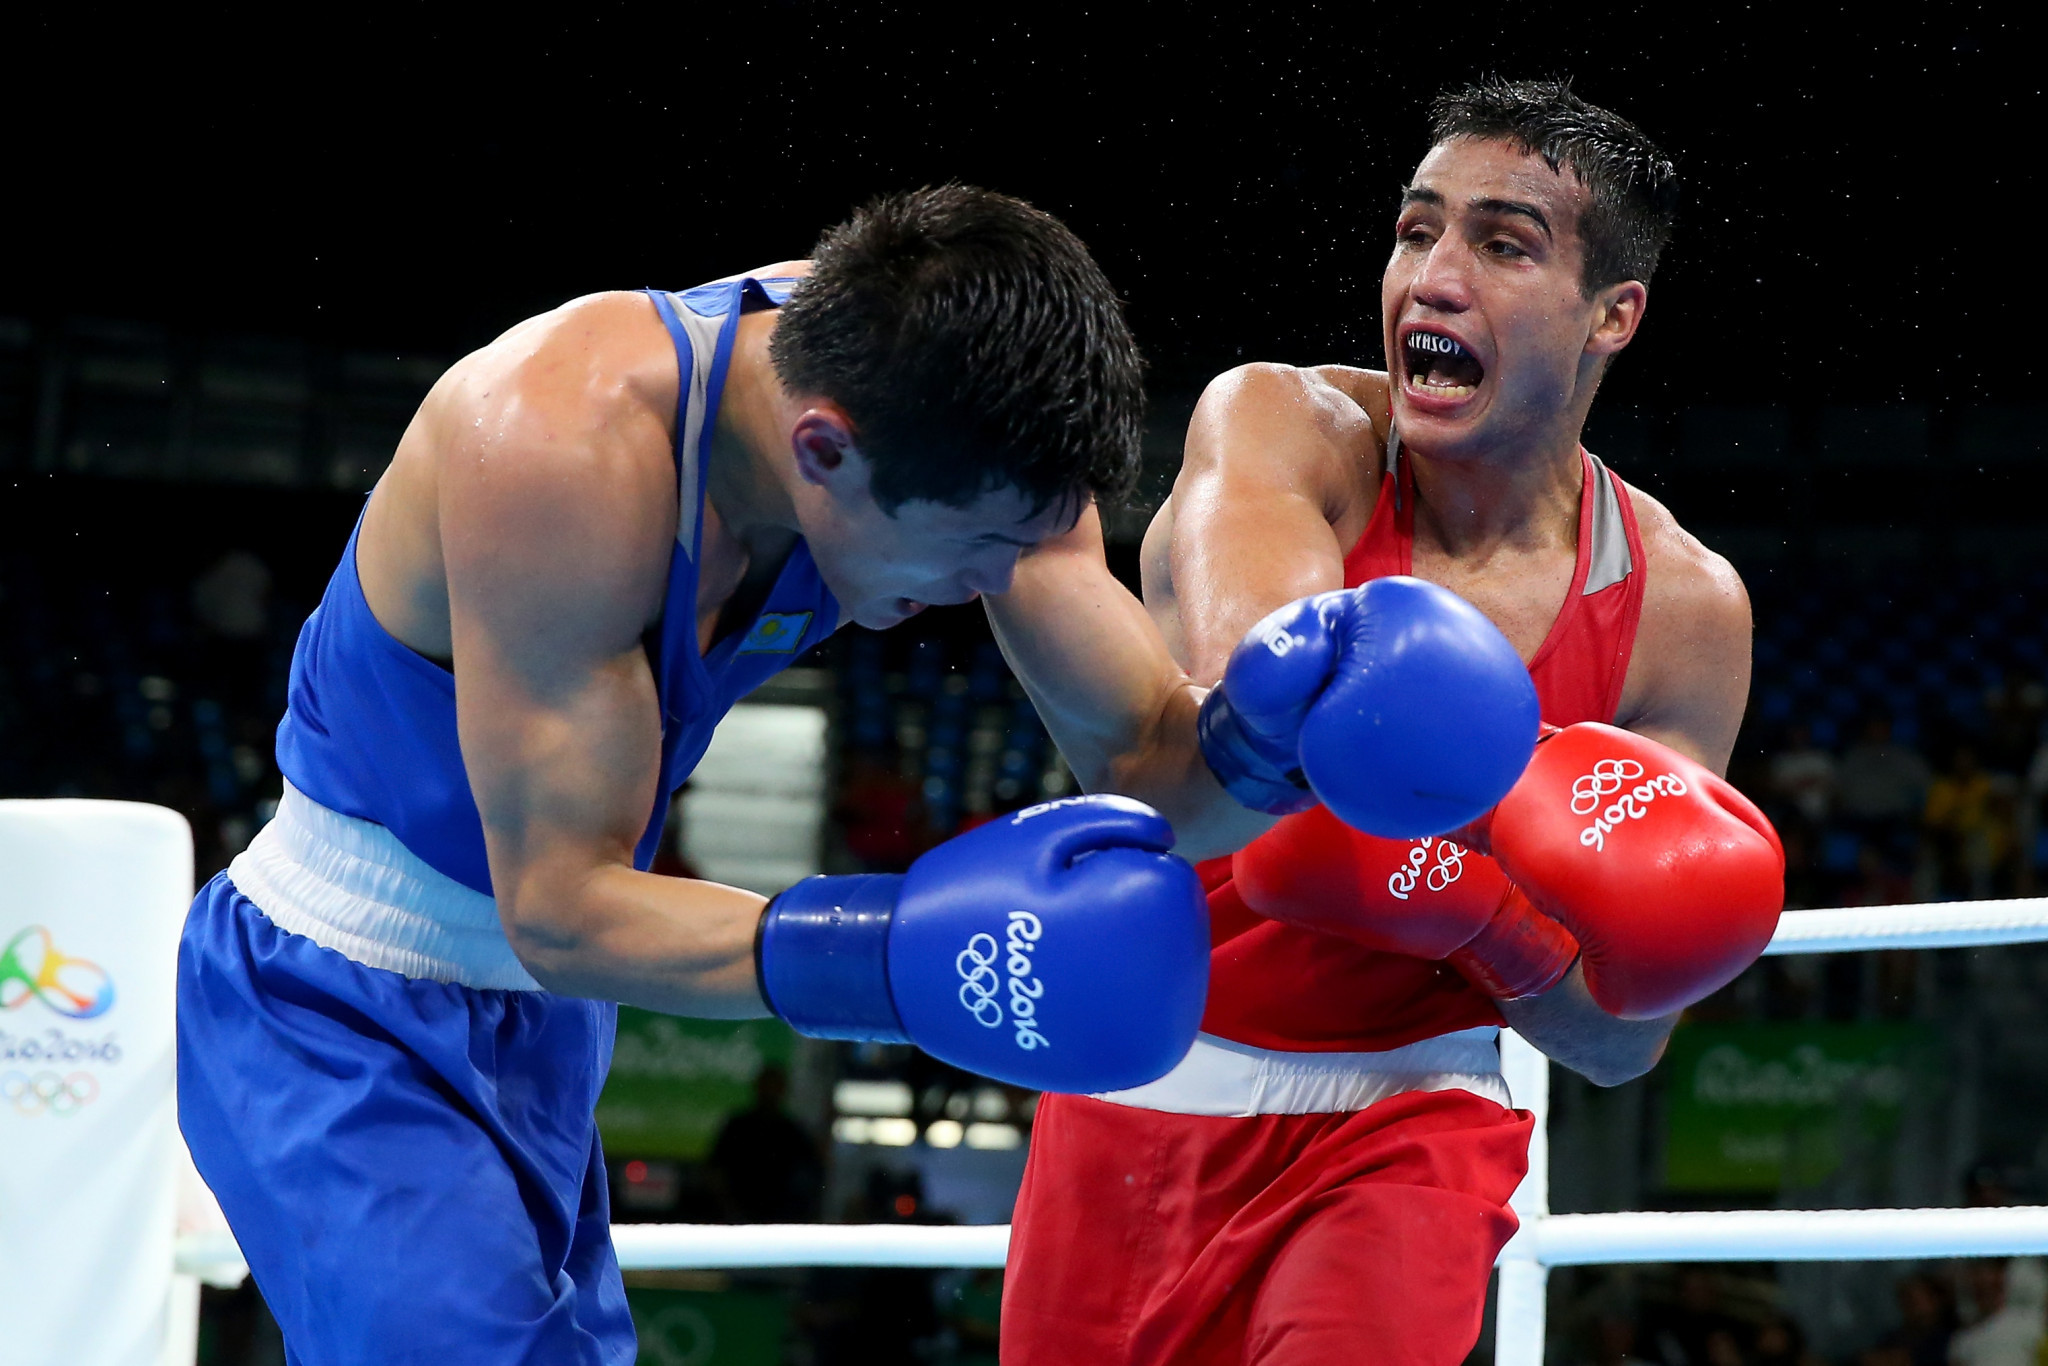 Boxing is set to feature at Tokyo 2020 but who organises the competition and qualification remains uncertain ©Getty Images